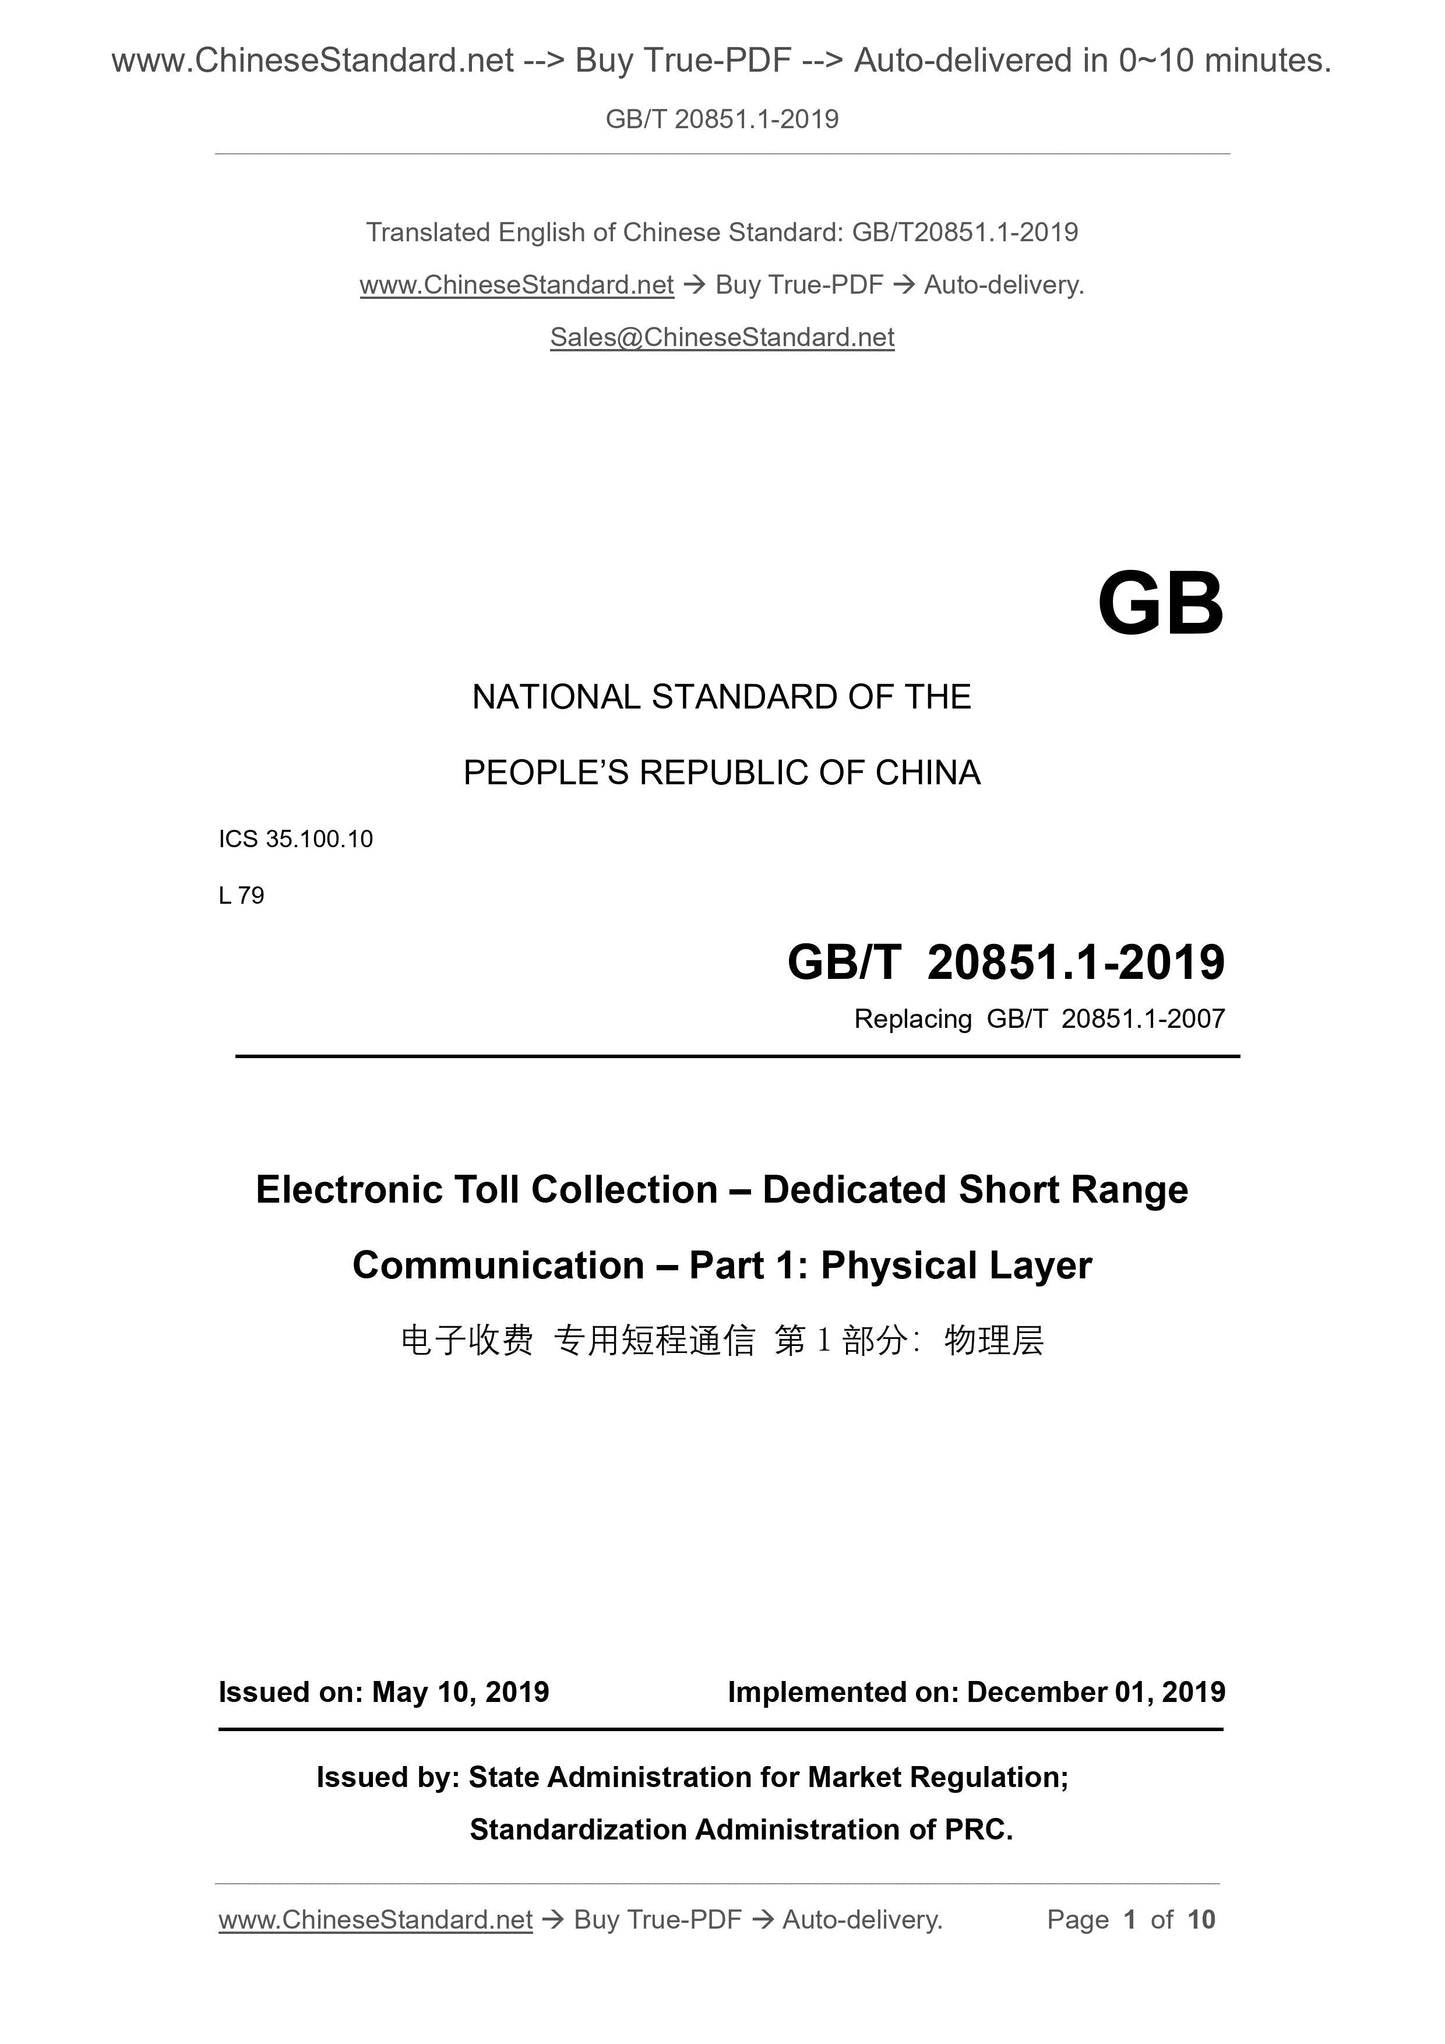 GB/T 20851.1-2019 Page 1